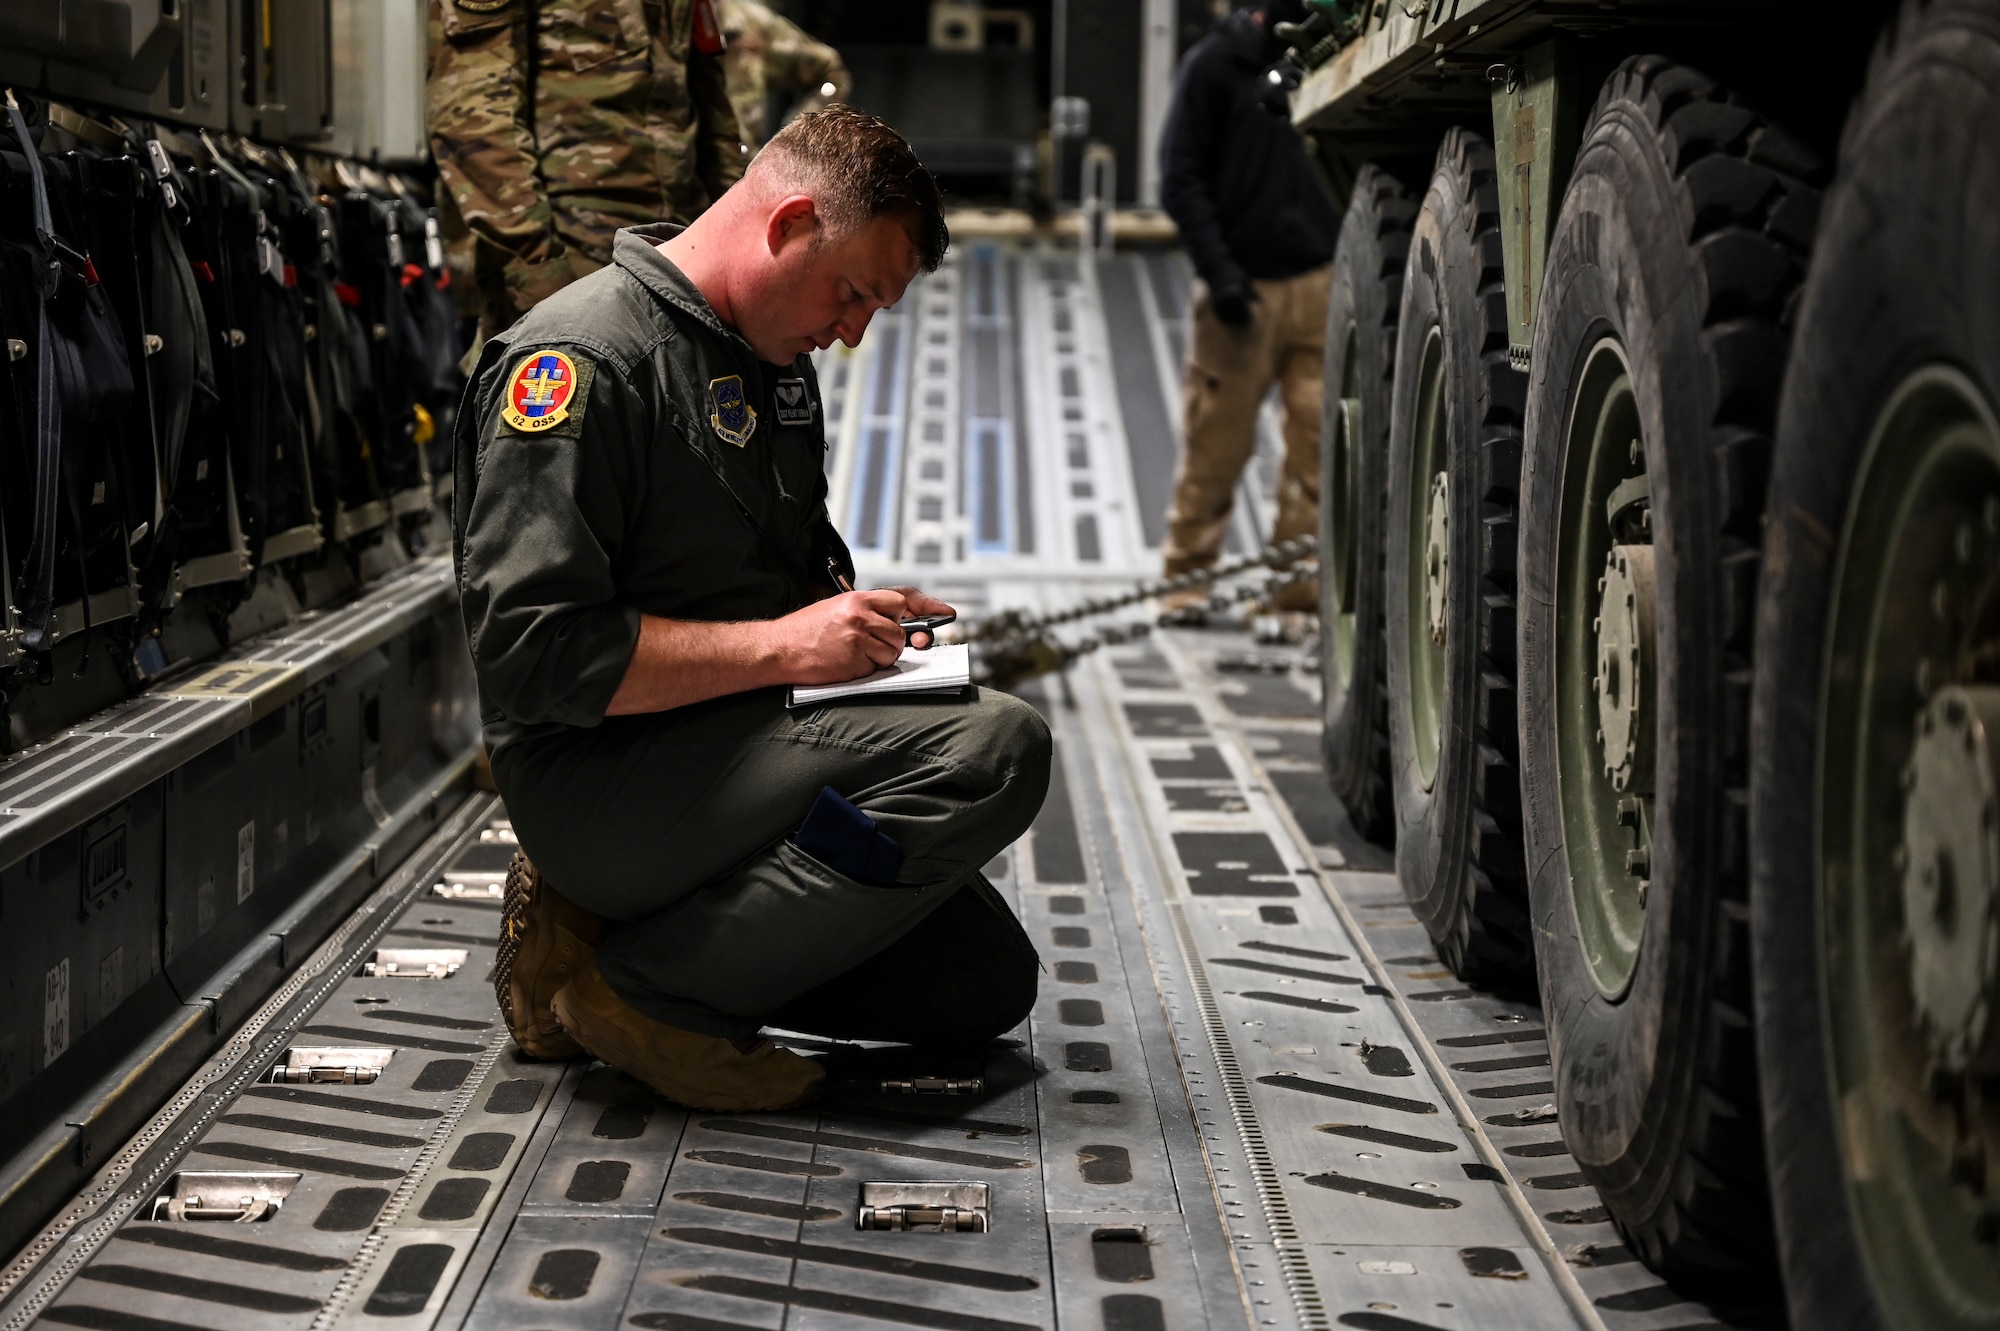 U.S. Air Force Staff Sgt. Flint Yerian, 8th Airlift Squadron loadmaster, checks the weight of a U.S. Army Stryker Infantry Carrier Vehicle aboard a C-17 Globemaster III as part of Exercise Rainier War at Joint Base Lewis-McChord, April 28, 2021. Rainier War tests the 62nd Airlift Wing's capability to plan, generate and execute a deployment tasking, sustain contingency operations, demonstrate full spectrum readiness while executing agile combat employment in a contested, degraded and operationally limited environment. (U.S. Air Force photo by Master Sgt. Julius Delos Reyes)